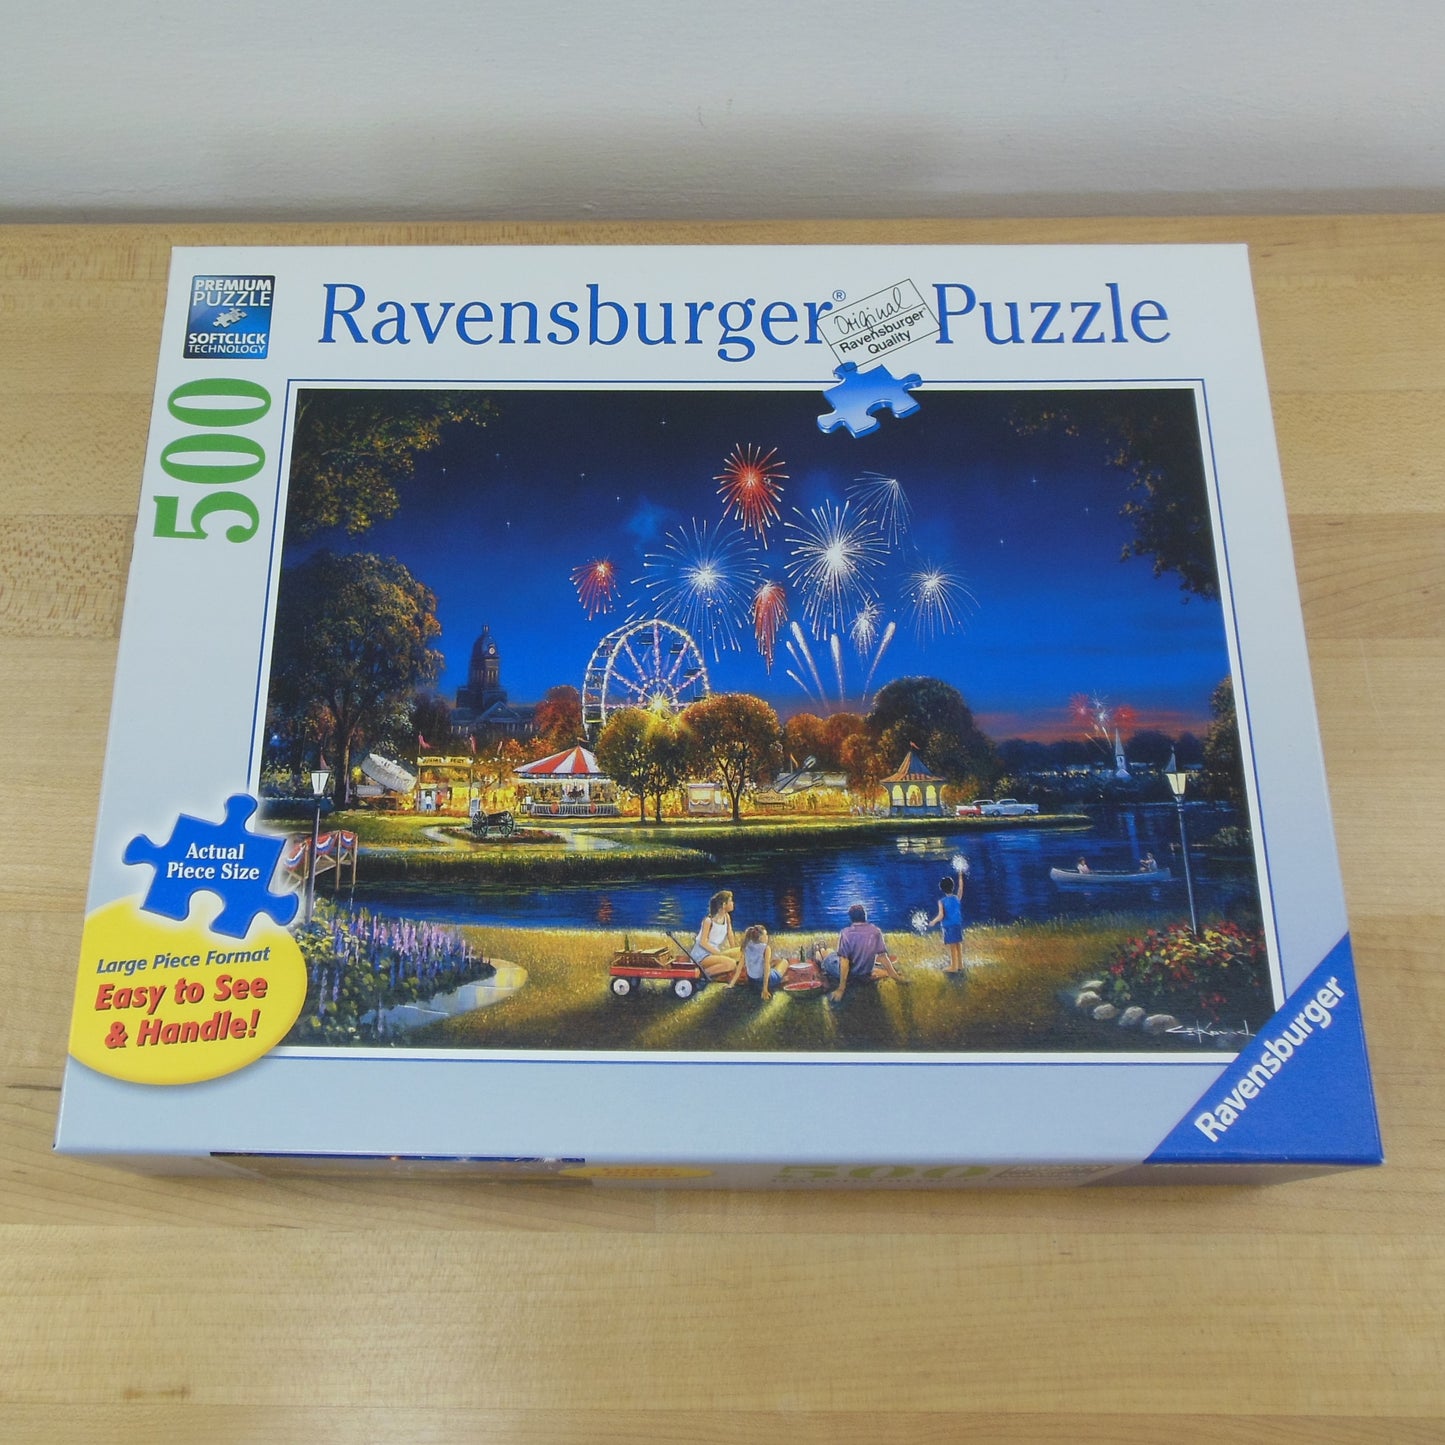 Ravensburger Puzzle 3 Lot 500 Large Pieces Star Spangled Underwater Smiles Butterflies Fourth of July